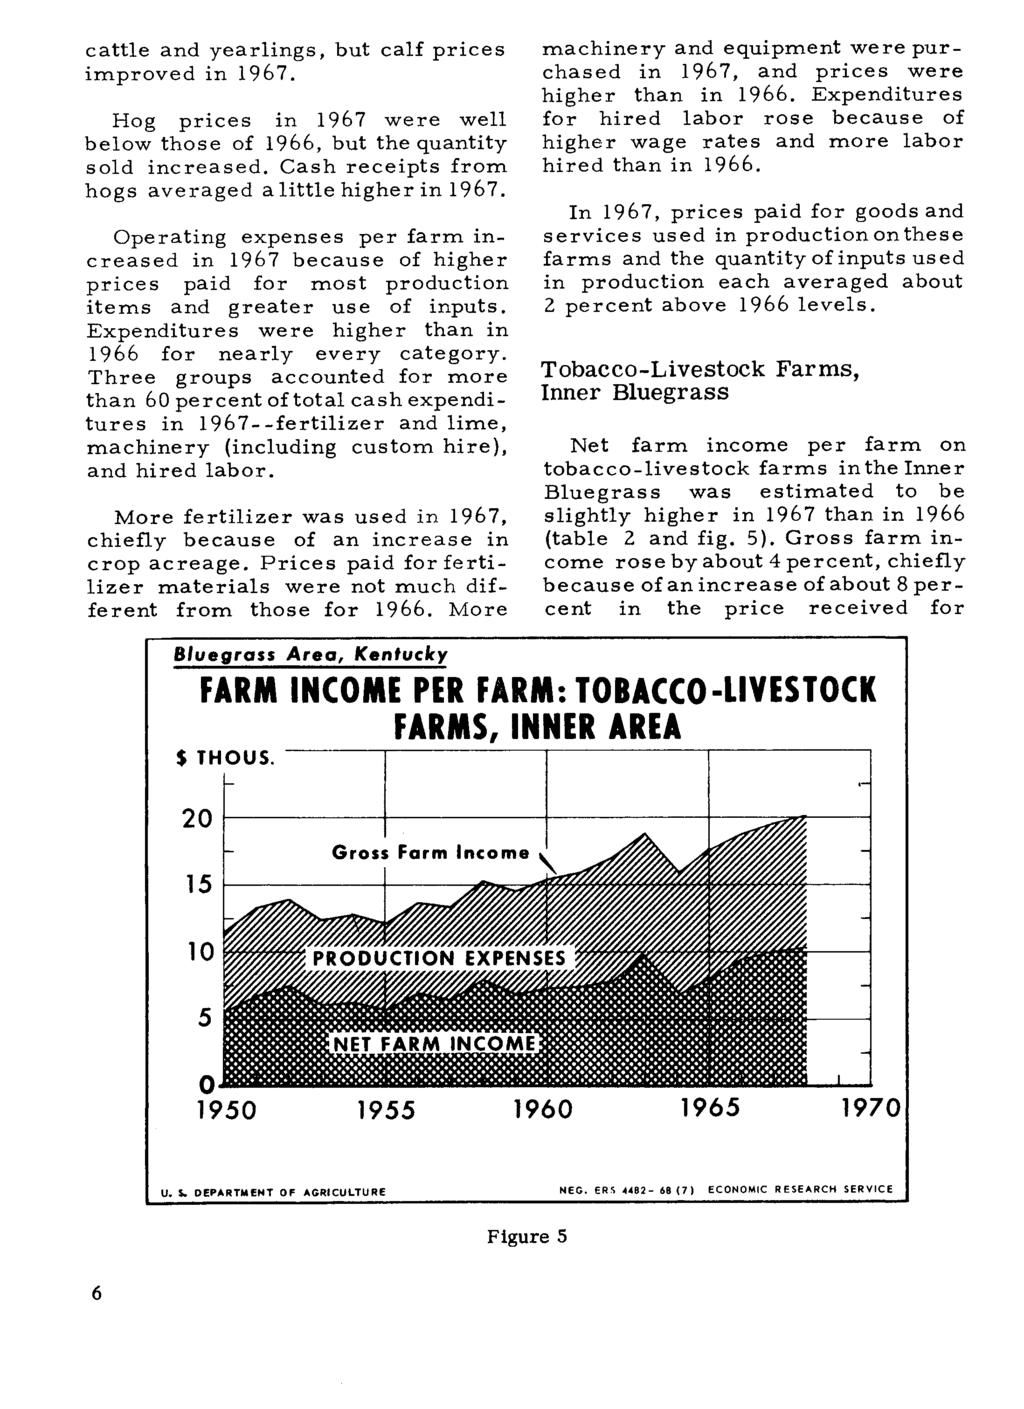 cattle and yearlings, but calf prices improved in 1967. Hog prices in 1967 were well below those of 1966, but the quantity sold increased. Cash receipts from hogs averaged a little higher in 1967.